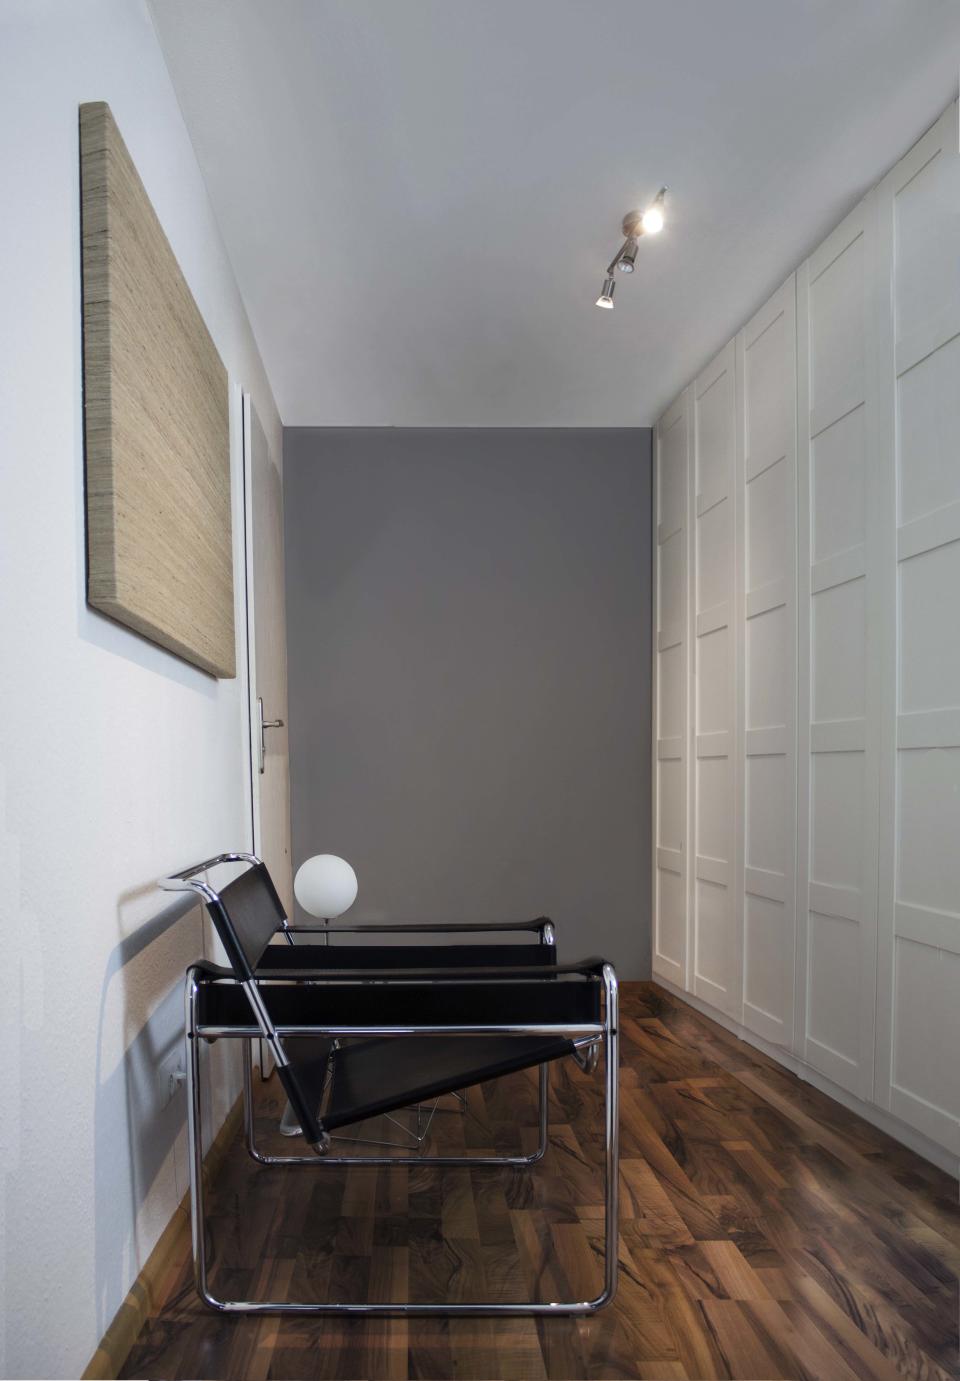 Talitha and Michael chose to install a large, floor-to-ceiling wardrobe—a PAX system from IKEA—to keep clutter out of sight in the entryway. Another Wassily Chair and a Vitra Occasional Table make for a quick place to put on shoes or drop keys, while the grey wall near the door elongates the space. One of ZWEI Design’s AC Globe Table Lamps hangs out next to the chair for soft lighting.